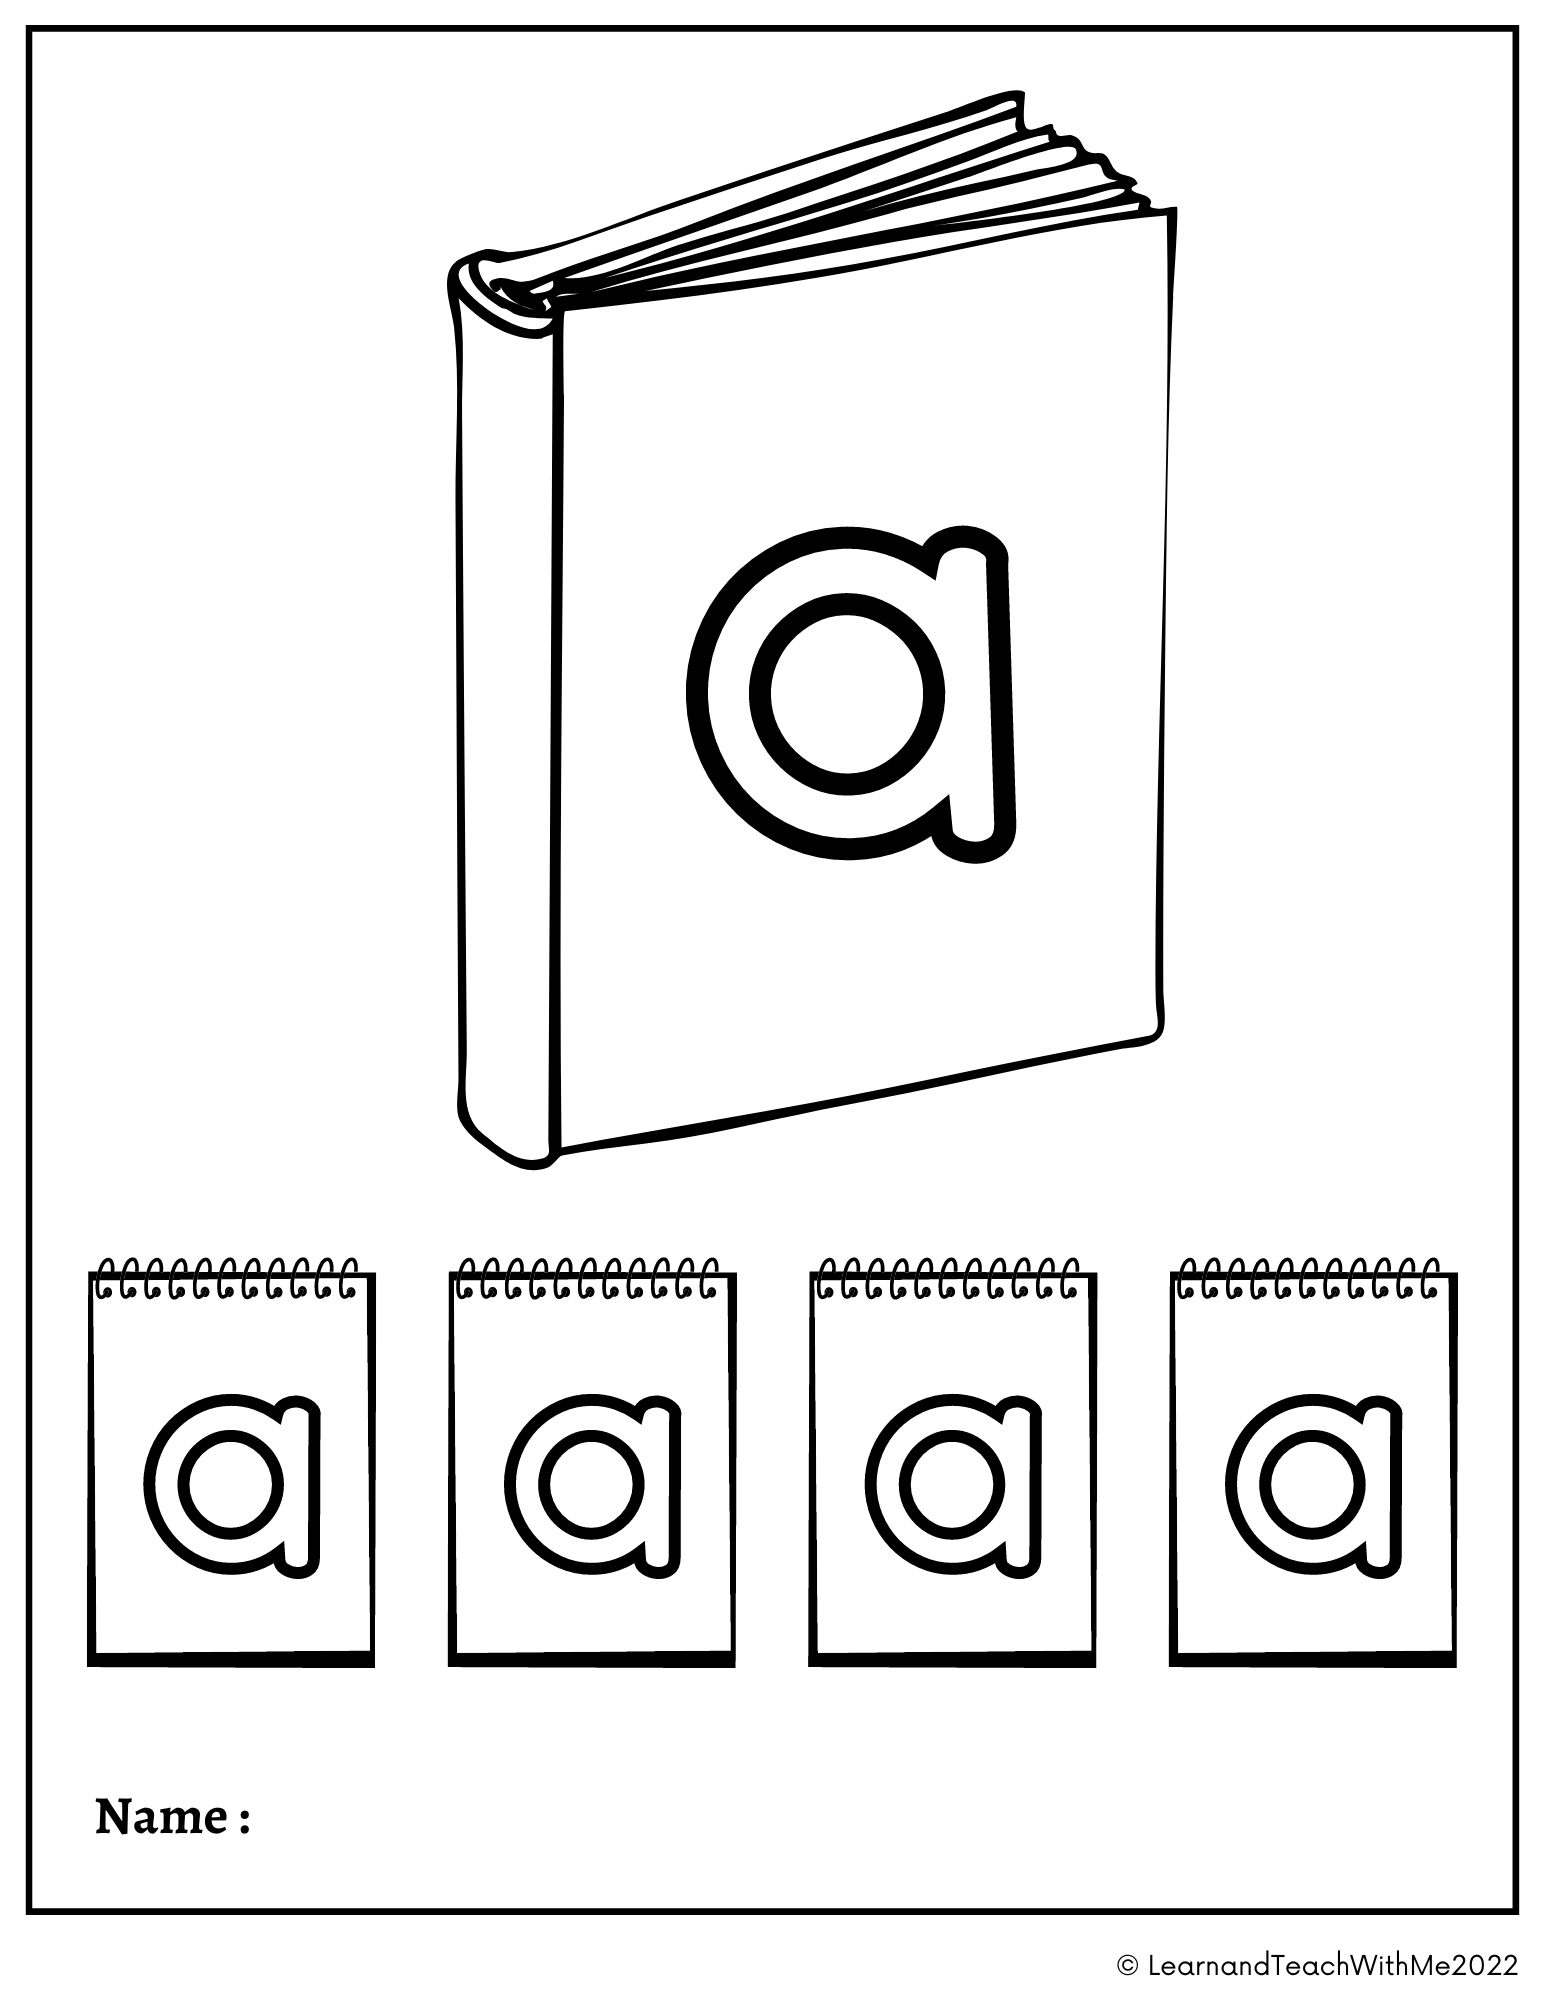 Alphabet coloring pages lowercase letters worksheets made by teachers